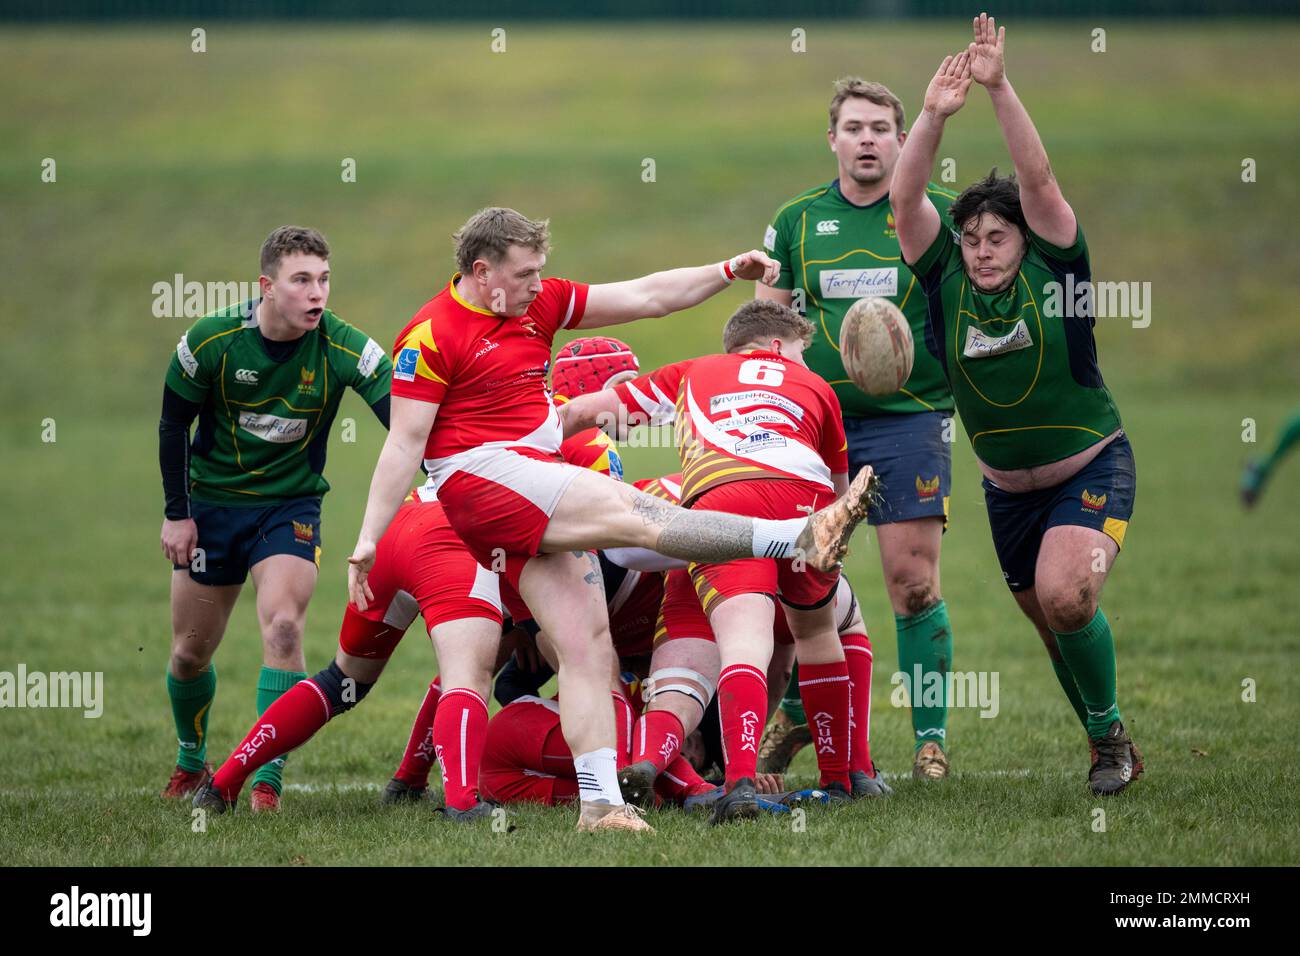 Rugby player drop kicking ball as opponent tries to charge down kick Stock Photo